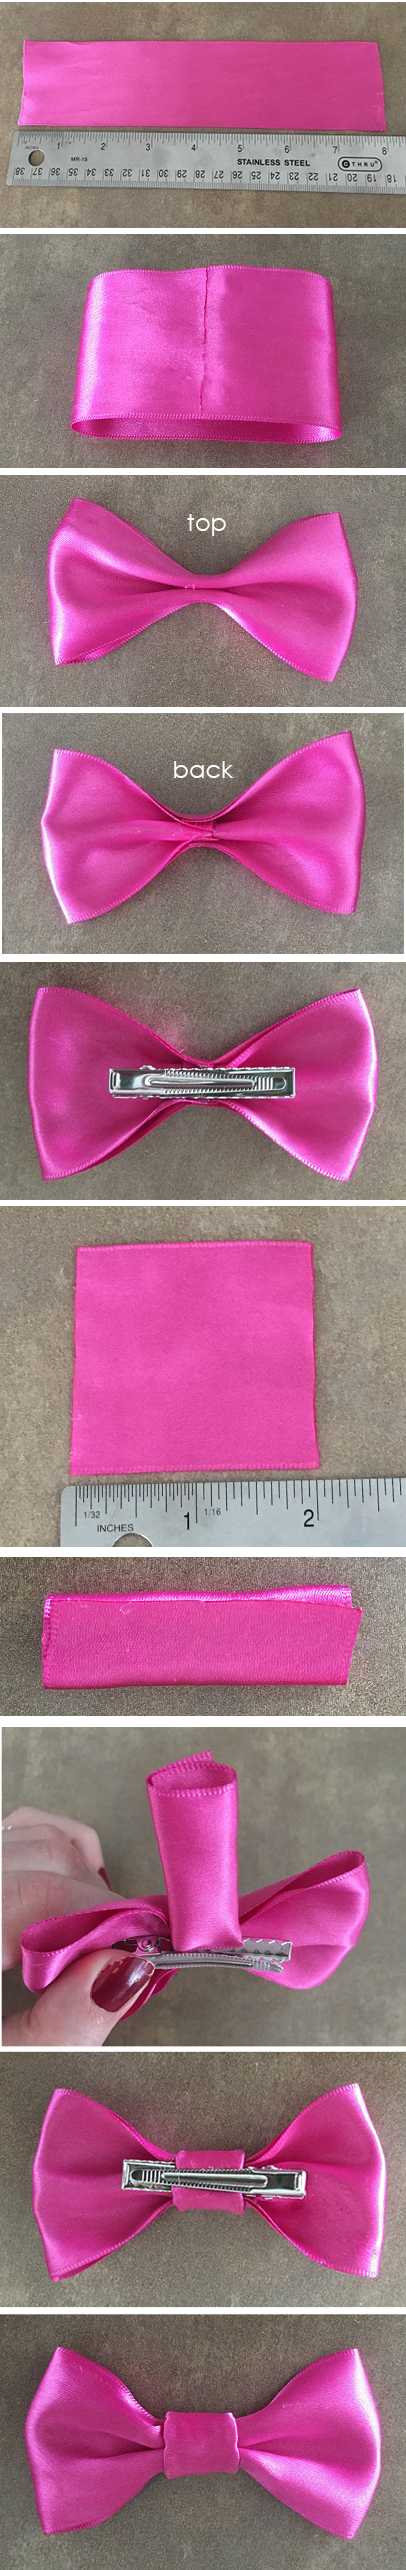 no sew bow hair clip step by step